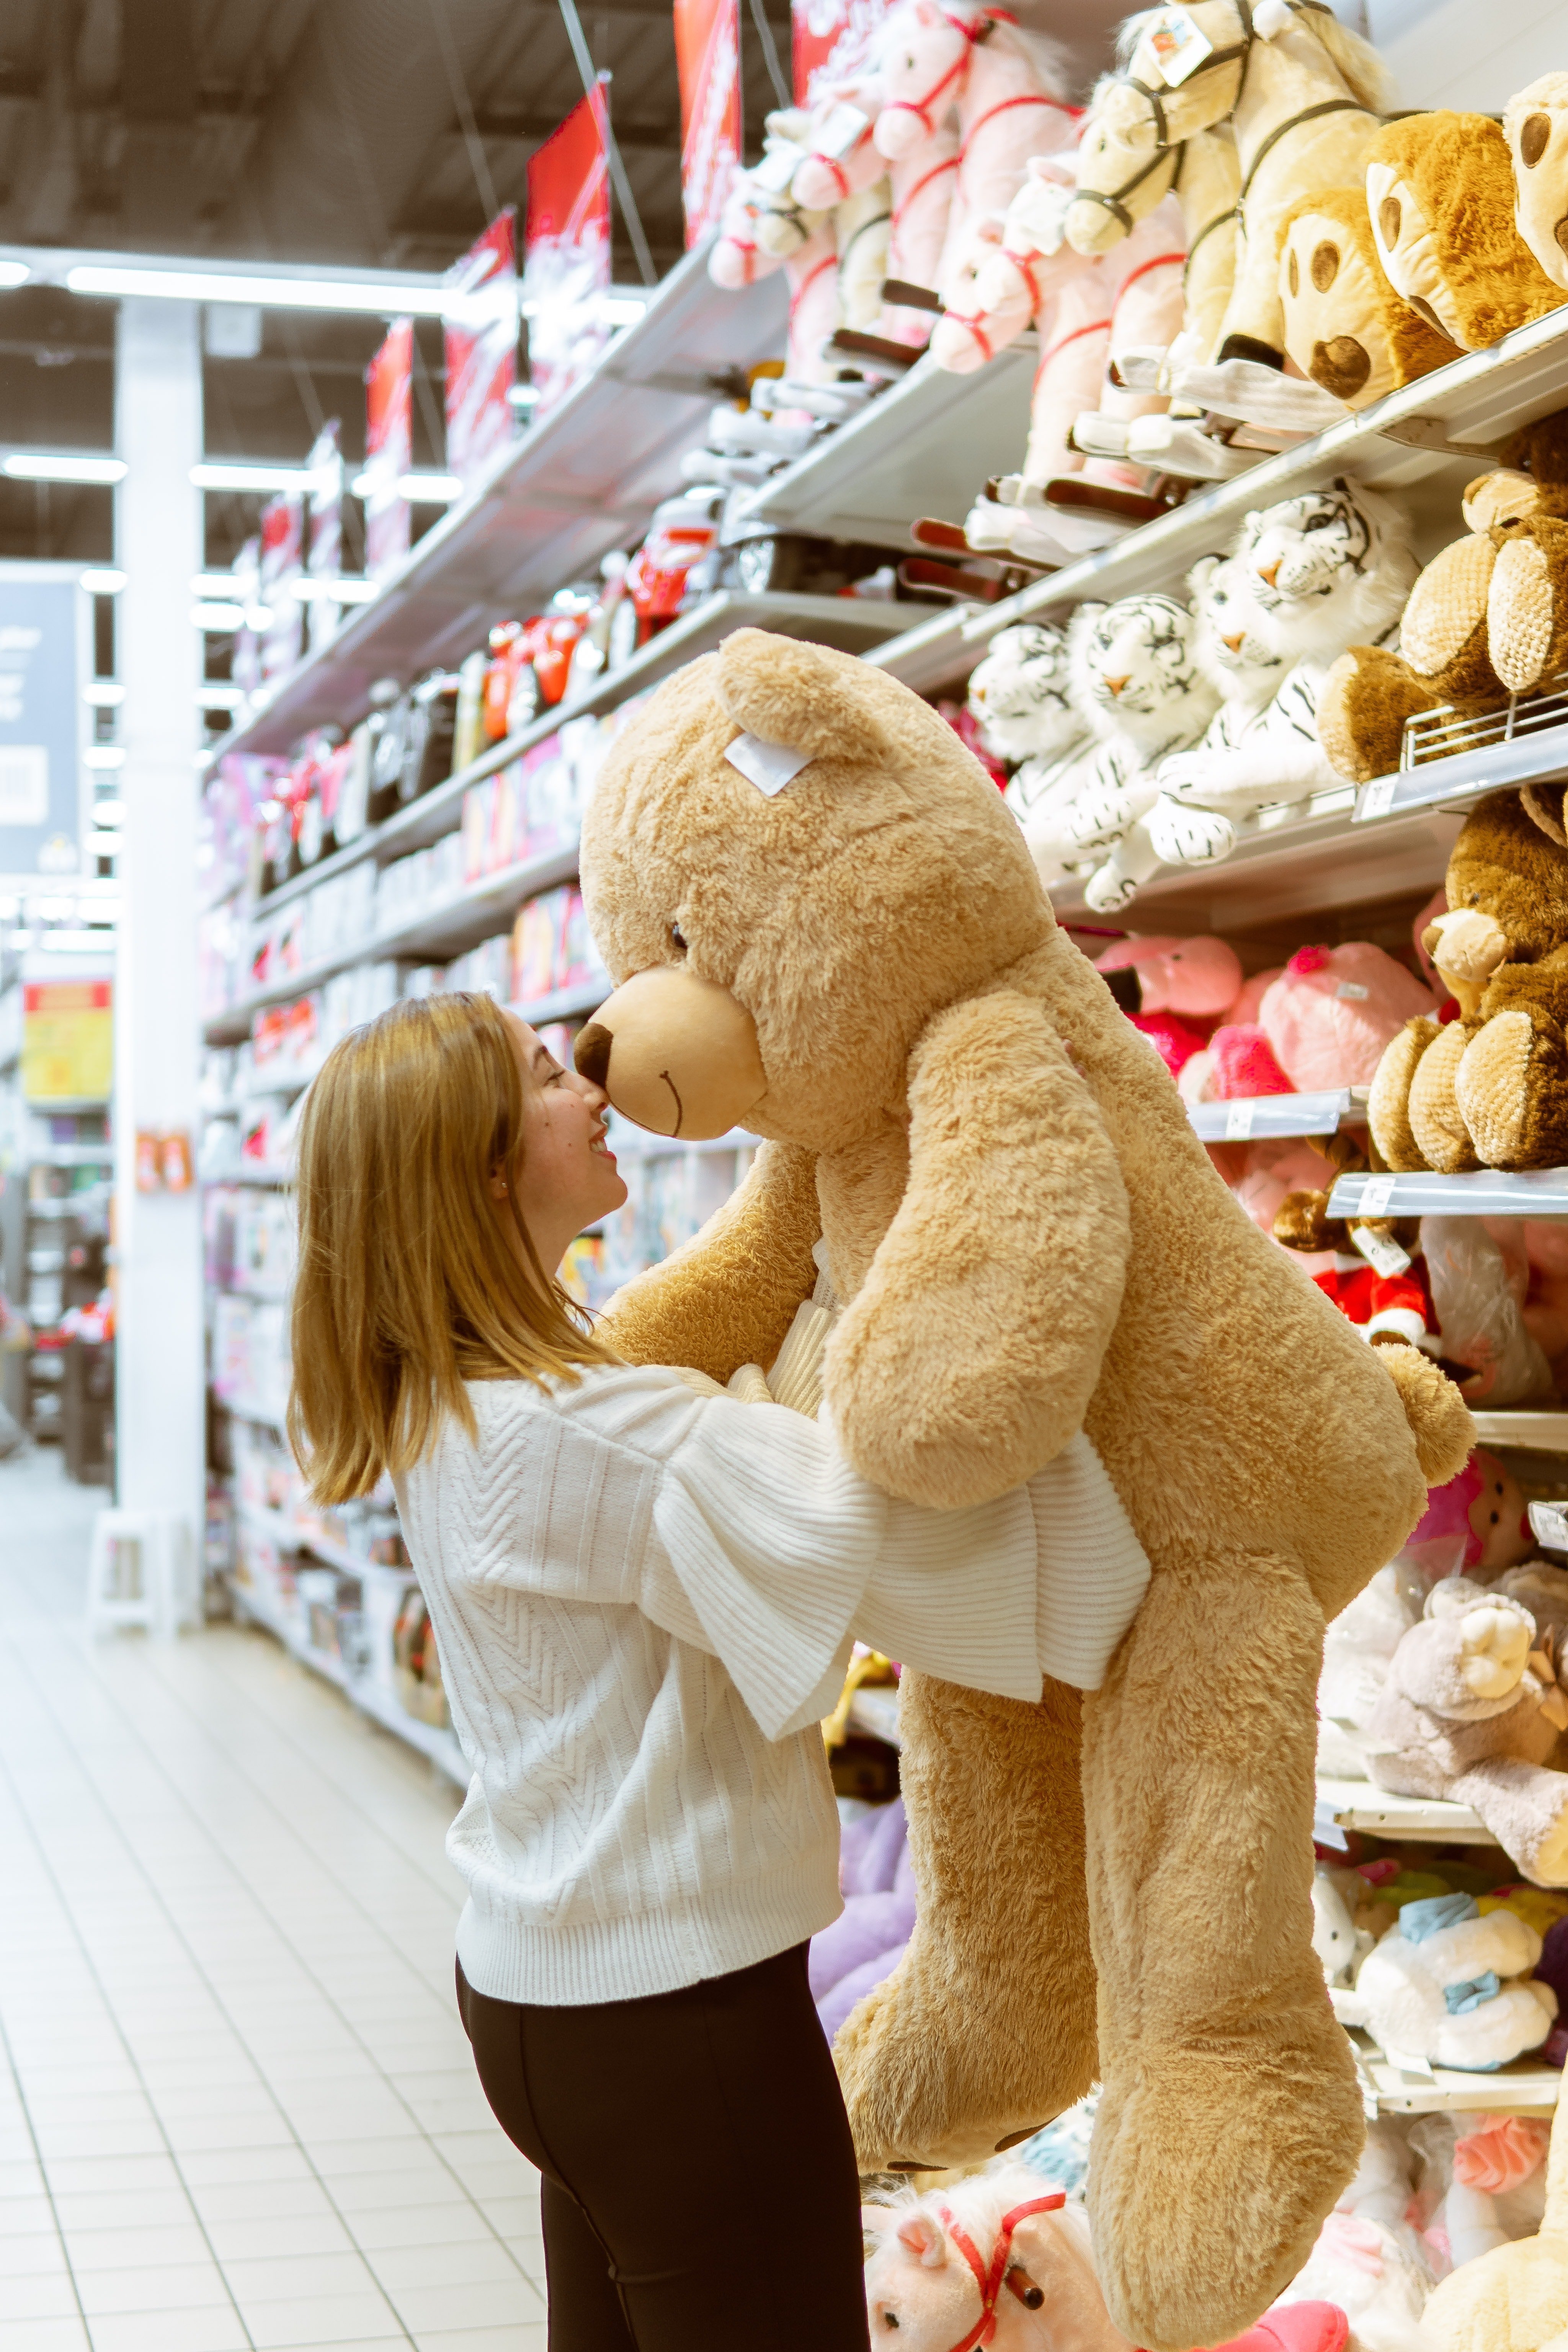 Catherine bought a beautiful teddy bear for Lily. | Source: Pexels